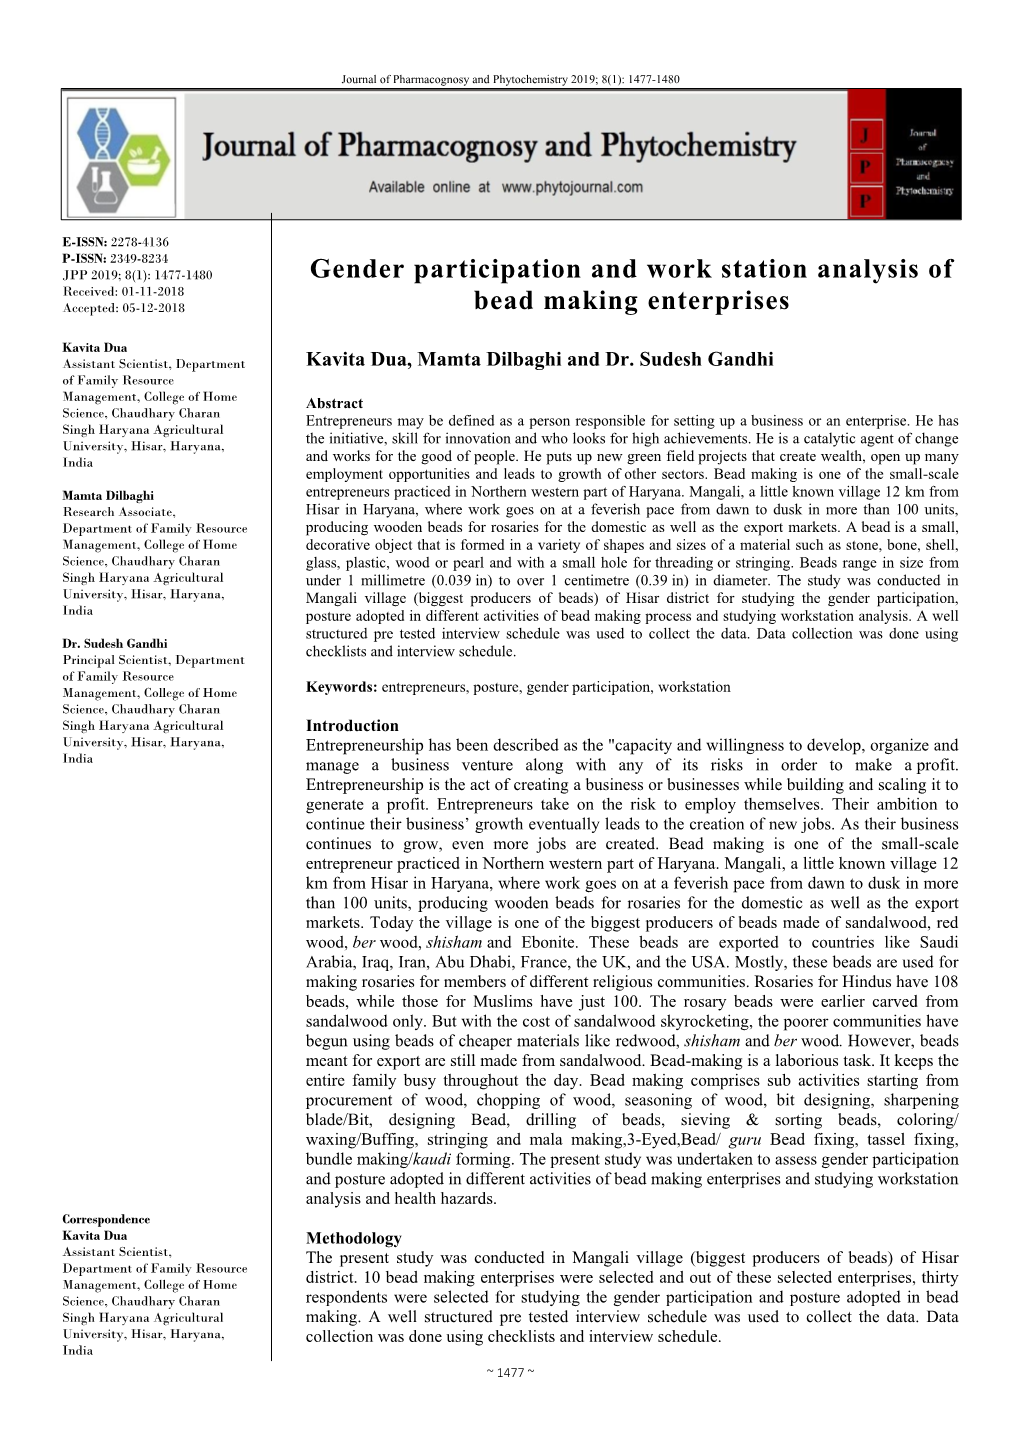 Gender Participation and Work Station Analysis of Bead Making Enterprises